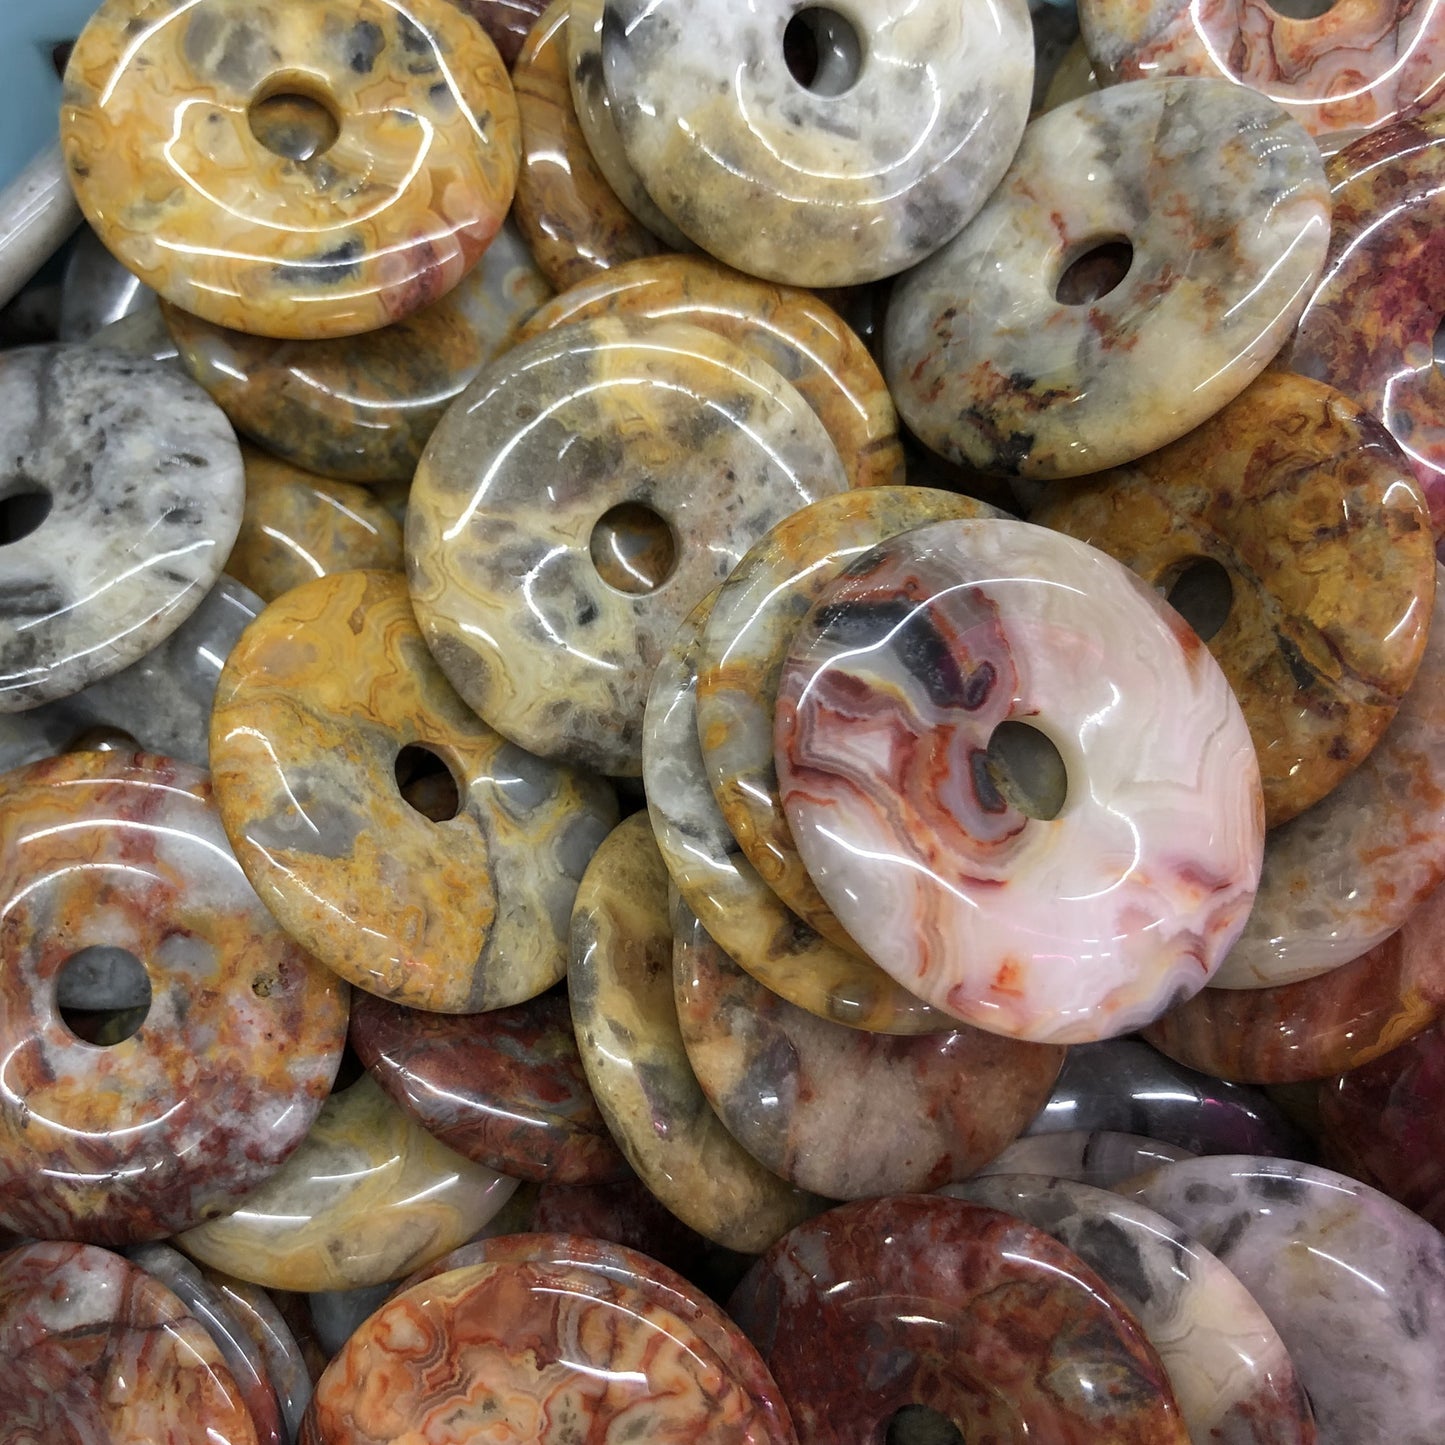 Crazy Agate Donut Pendant 30mm 40mm 50mm 1pc